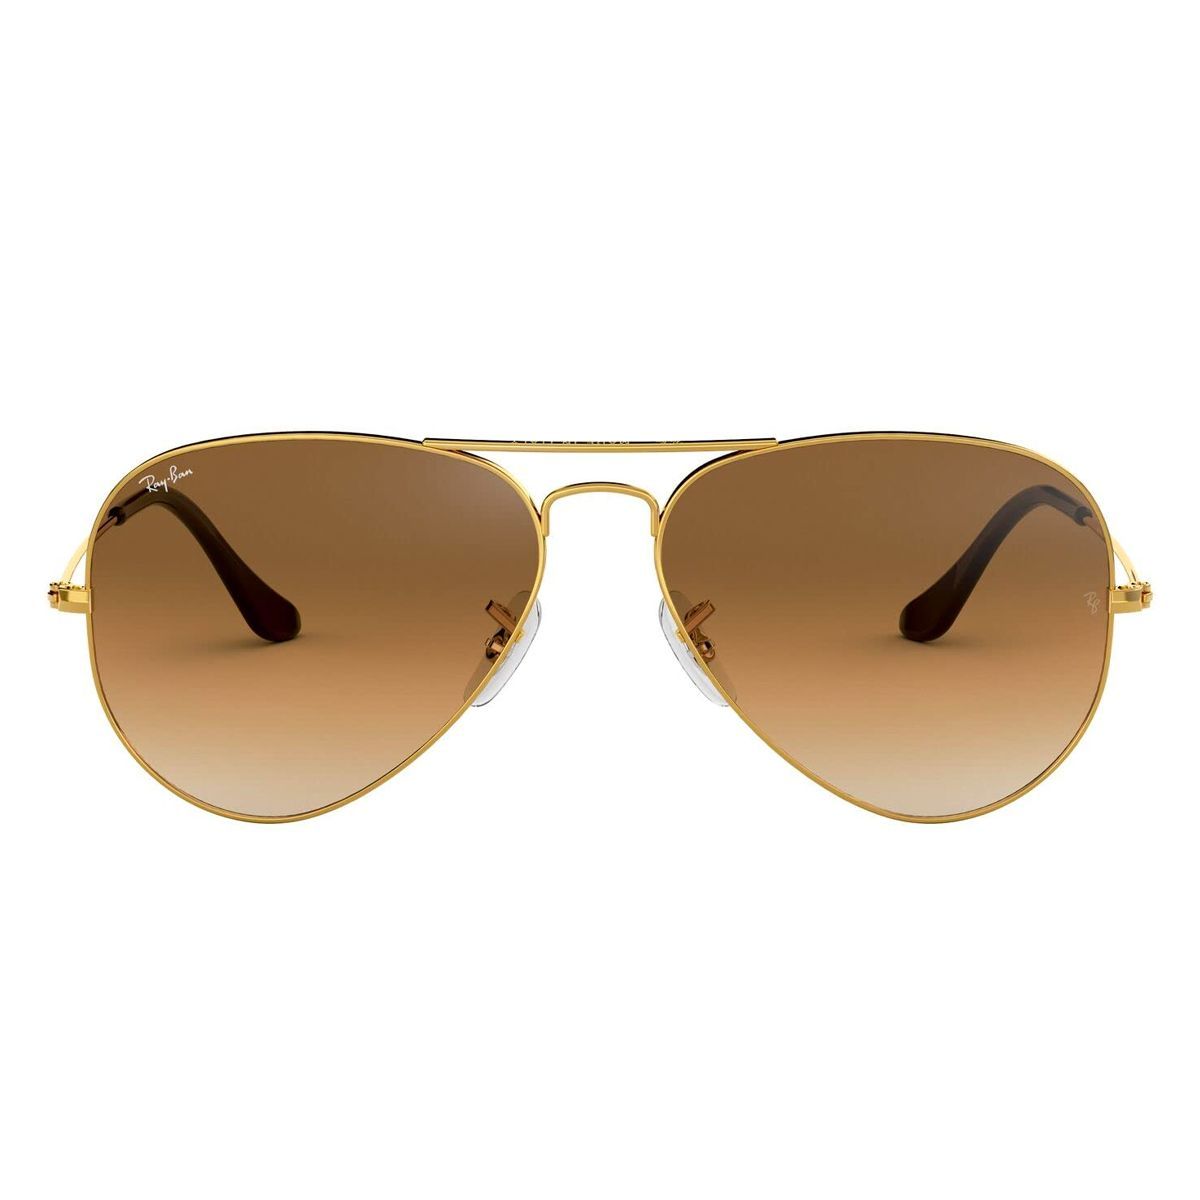 The Best Aviator Sunglasses Any Guy Can Pull Off